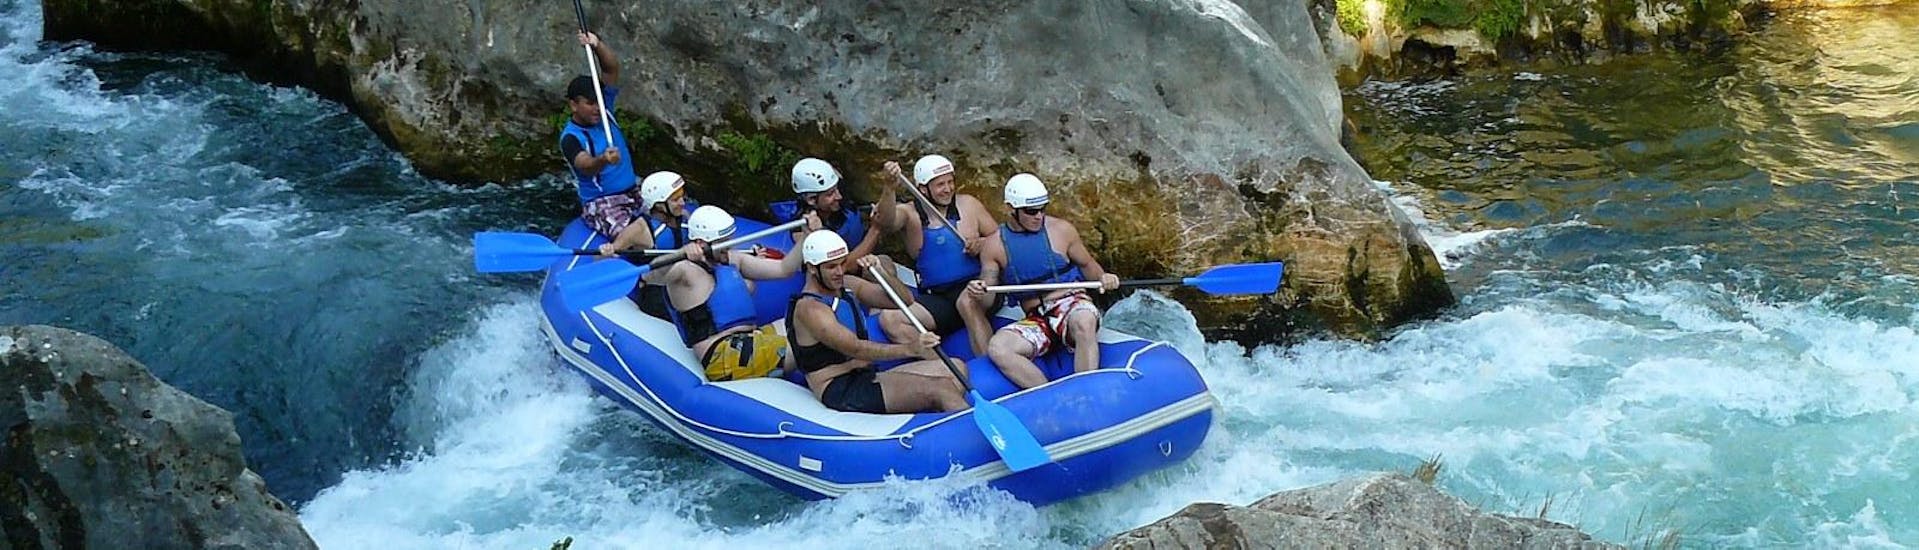 A rafting group has fun paddling down the wild waters of Cetina River on their Rafting Tour "Classic" under the guidance of an experienced instructor from Croatia Rafting.